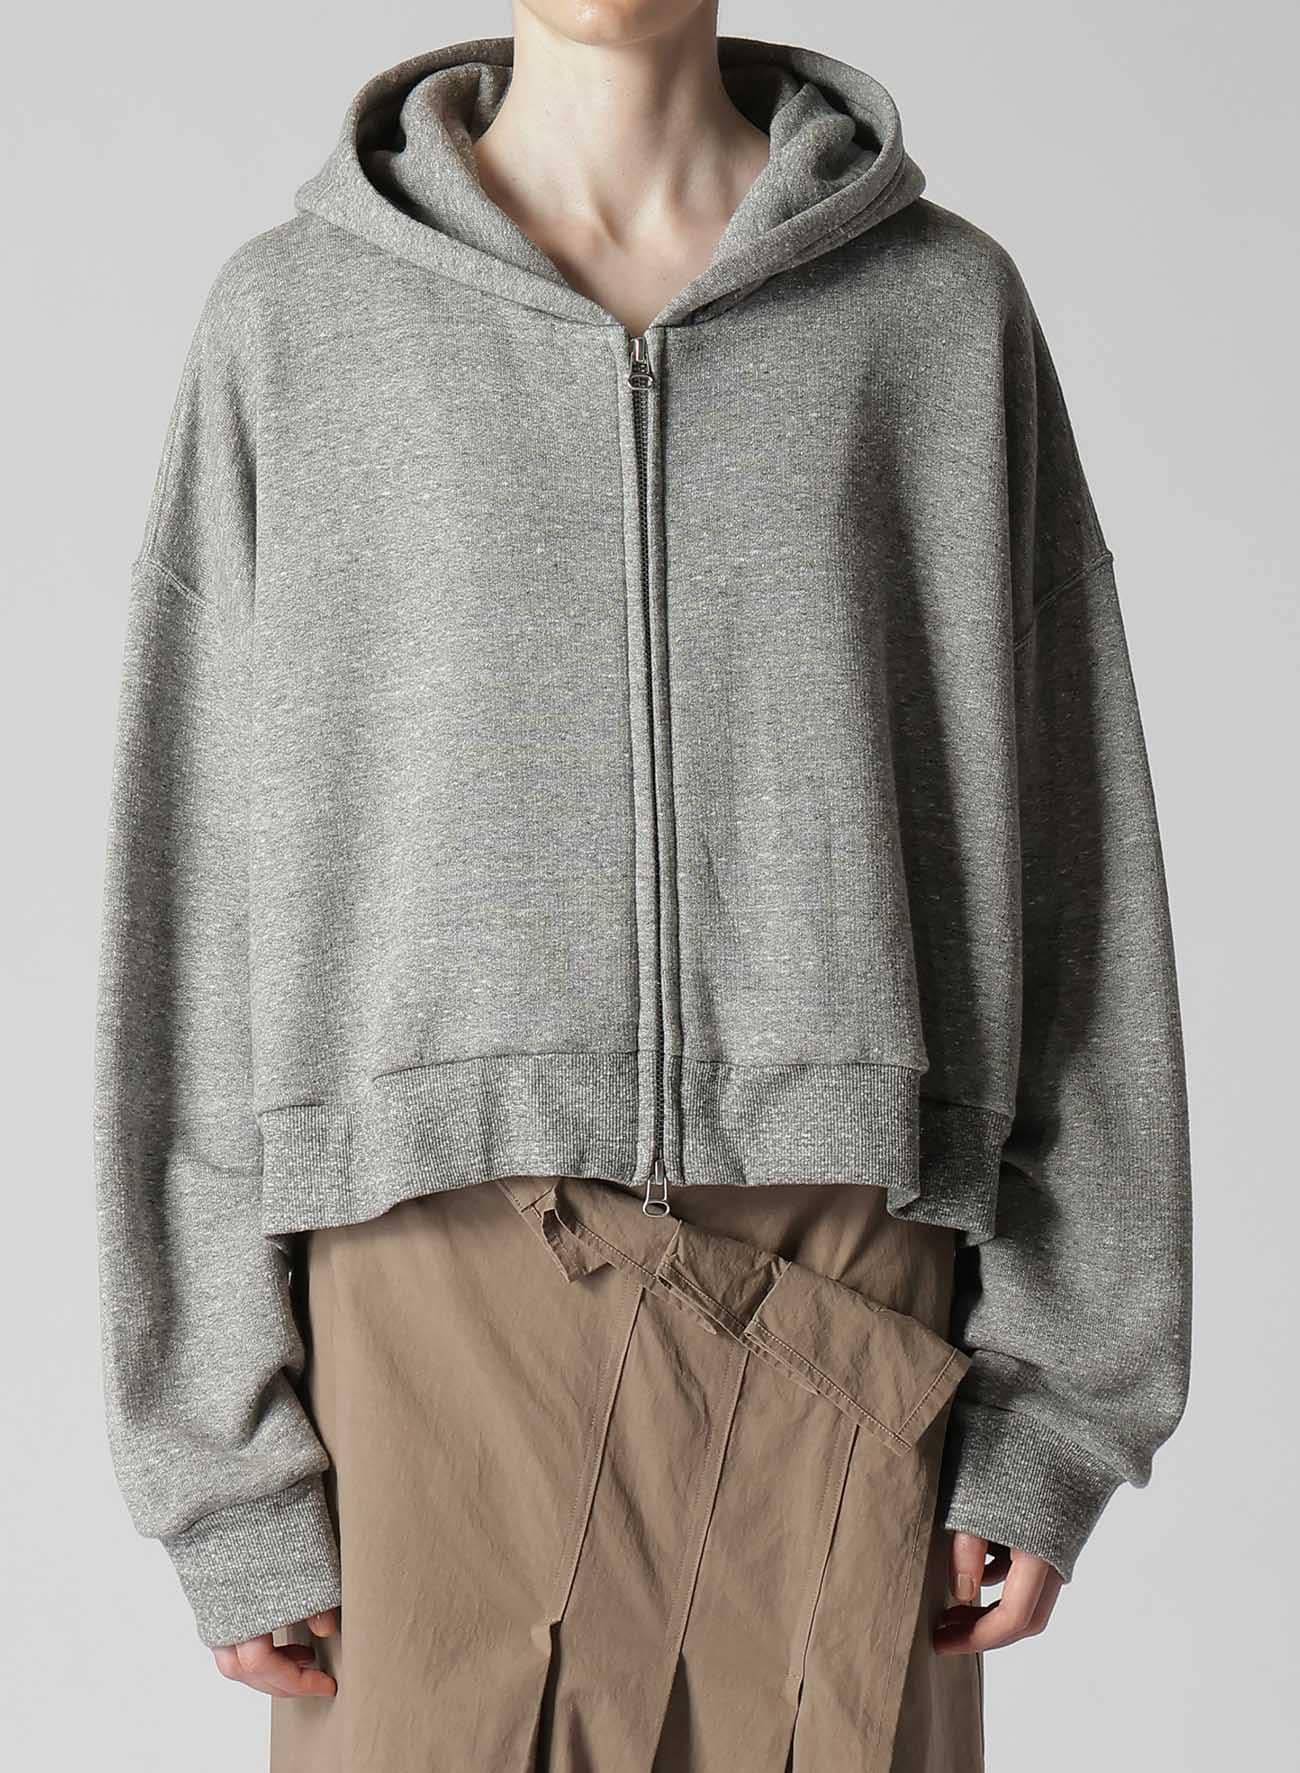 FRENCH TERRY Y'S LOGO EMBROIDERY CROPPED ZIP-UP HOODIE(S Grey 